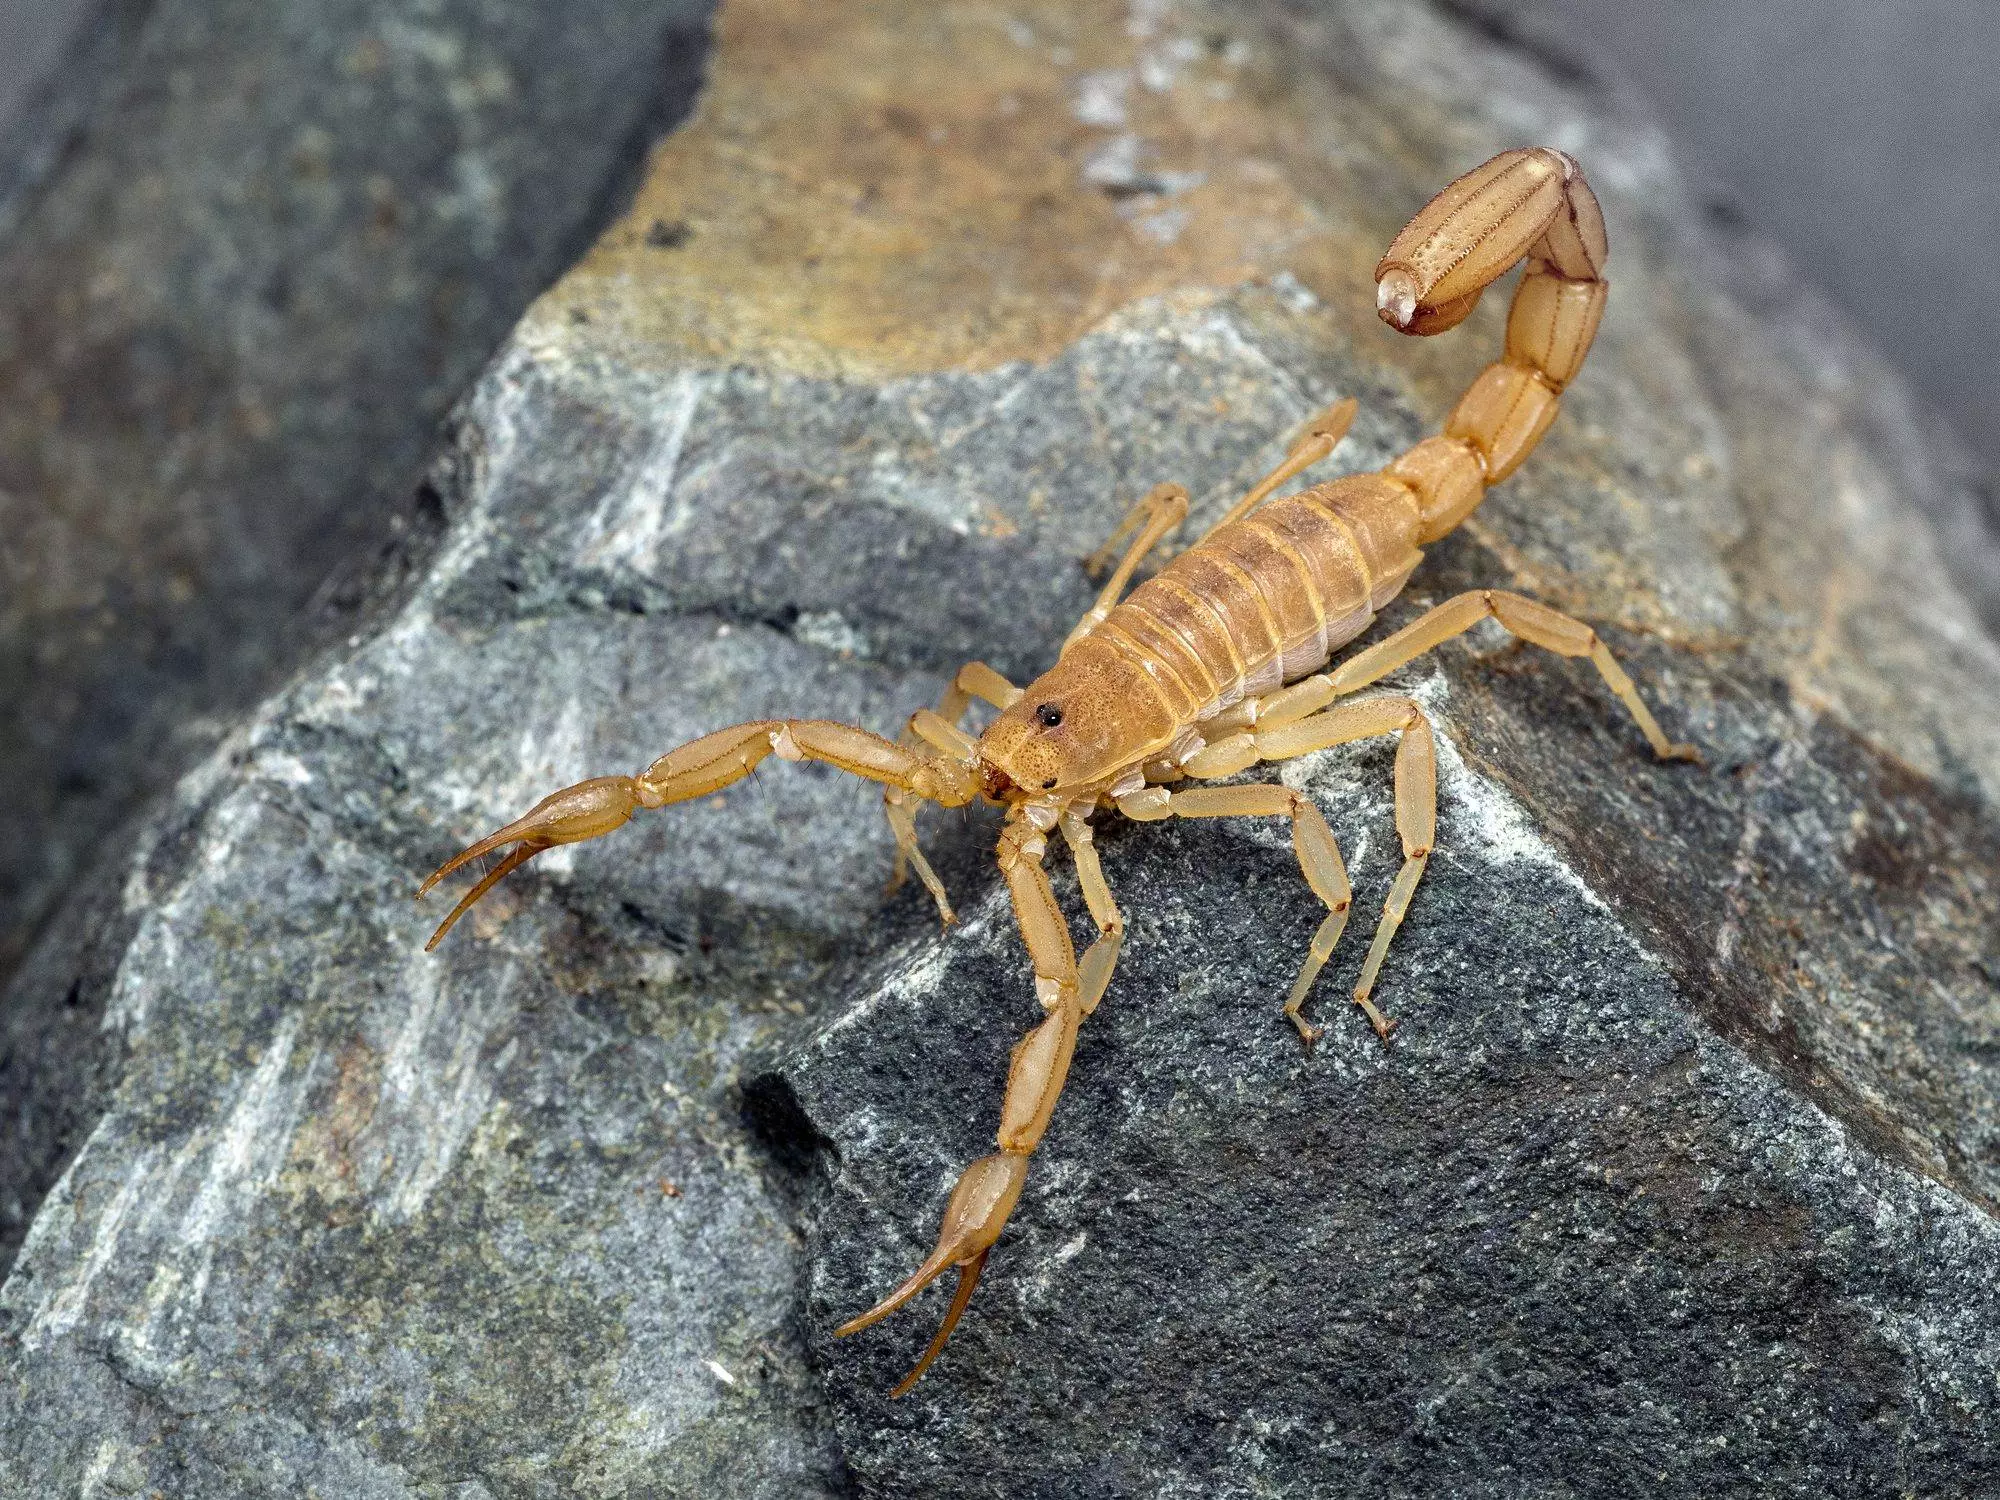 Yellow Ground Scorpion, on rock, 3/4 view. These relatively small scorpions are also known as Coahuila devil scorpions. Arizona Scorpions